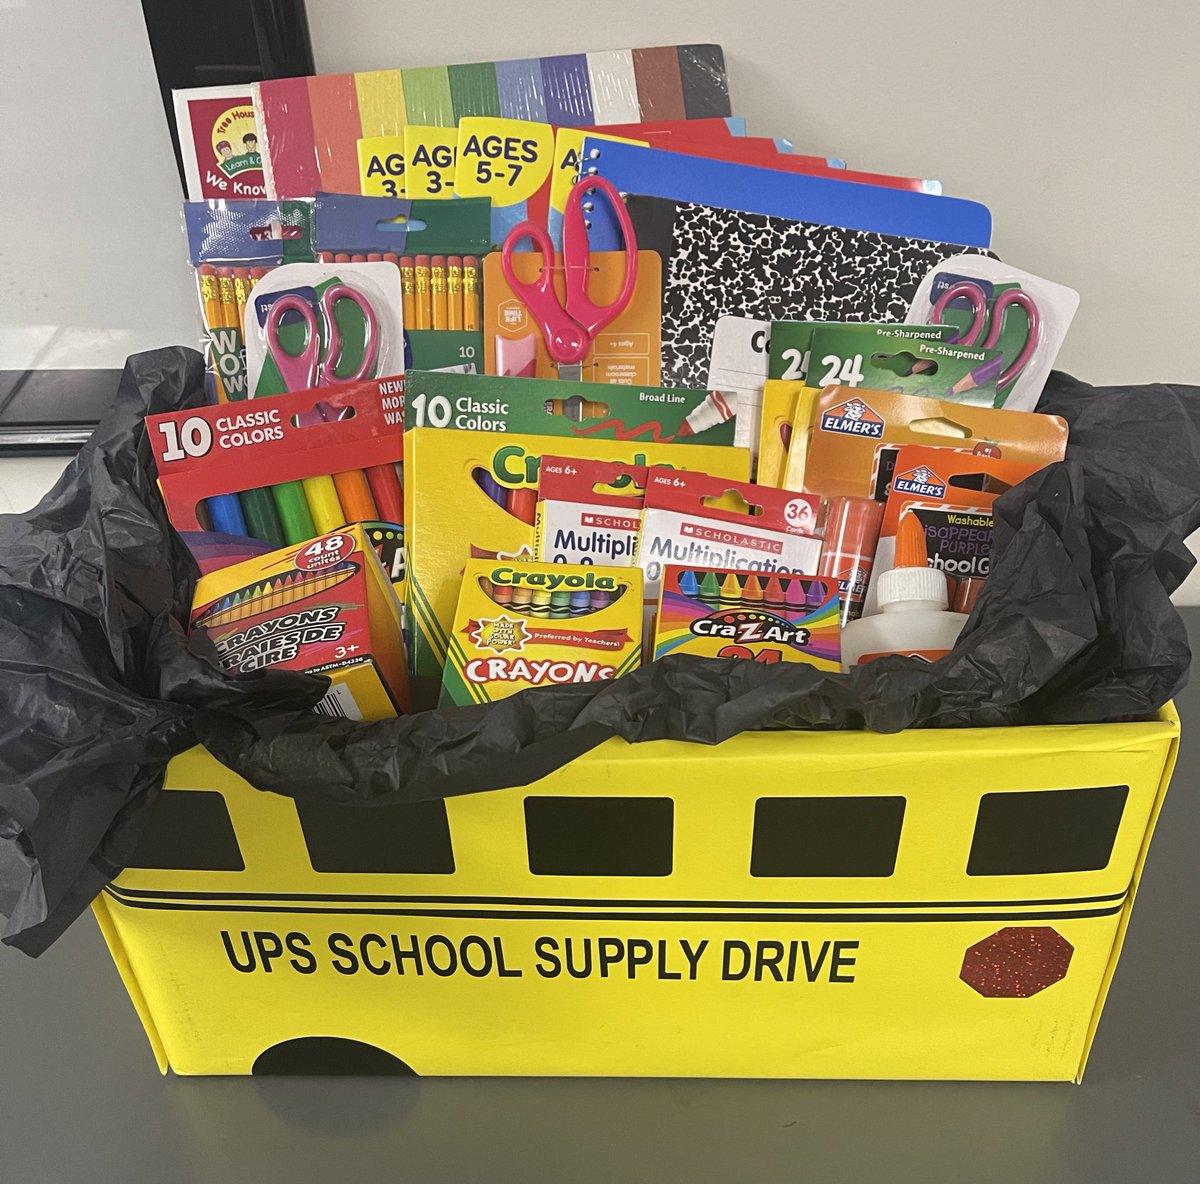 ✏️📚 We’re on a mission this August! Join our school supply drive and help us pack success into every backpack. Your support pencils in a brighter future! #UPSGivesBack #DeliverWhatMatters #CommunityConnections